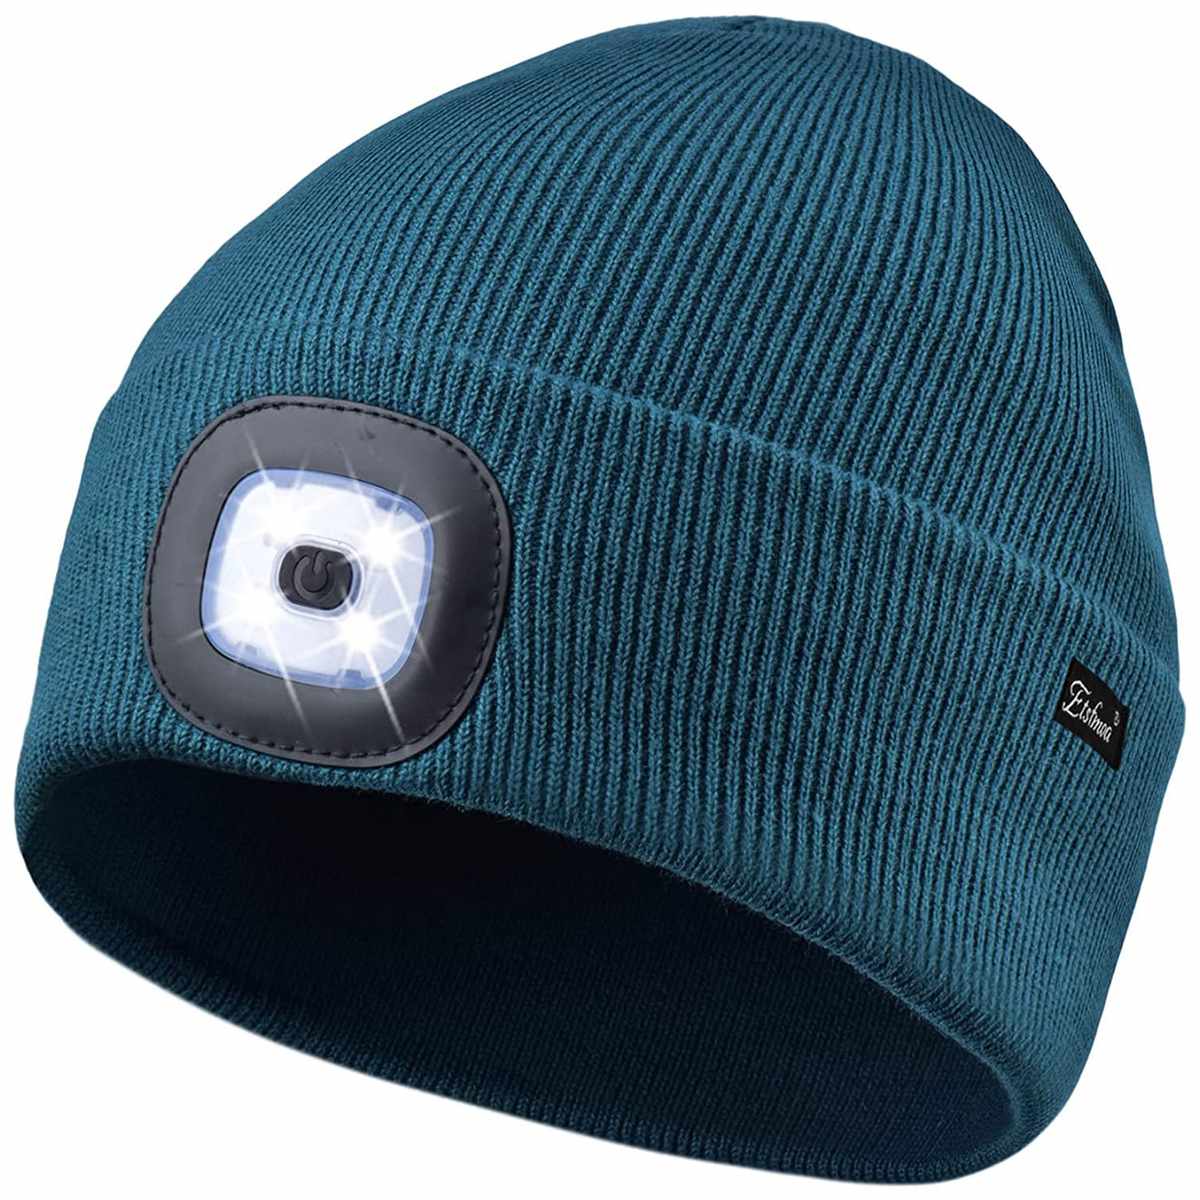 Gifts for dad,Gadgets Gift for Men and Women USB Rechargeable Winter Knit Lighted Headlight Hats Headlamp Torch Skull Cap（Army Green） Etsfmoa Unisex LED Beanie Hat with Light 